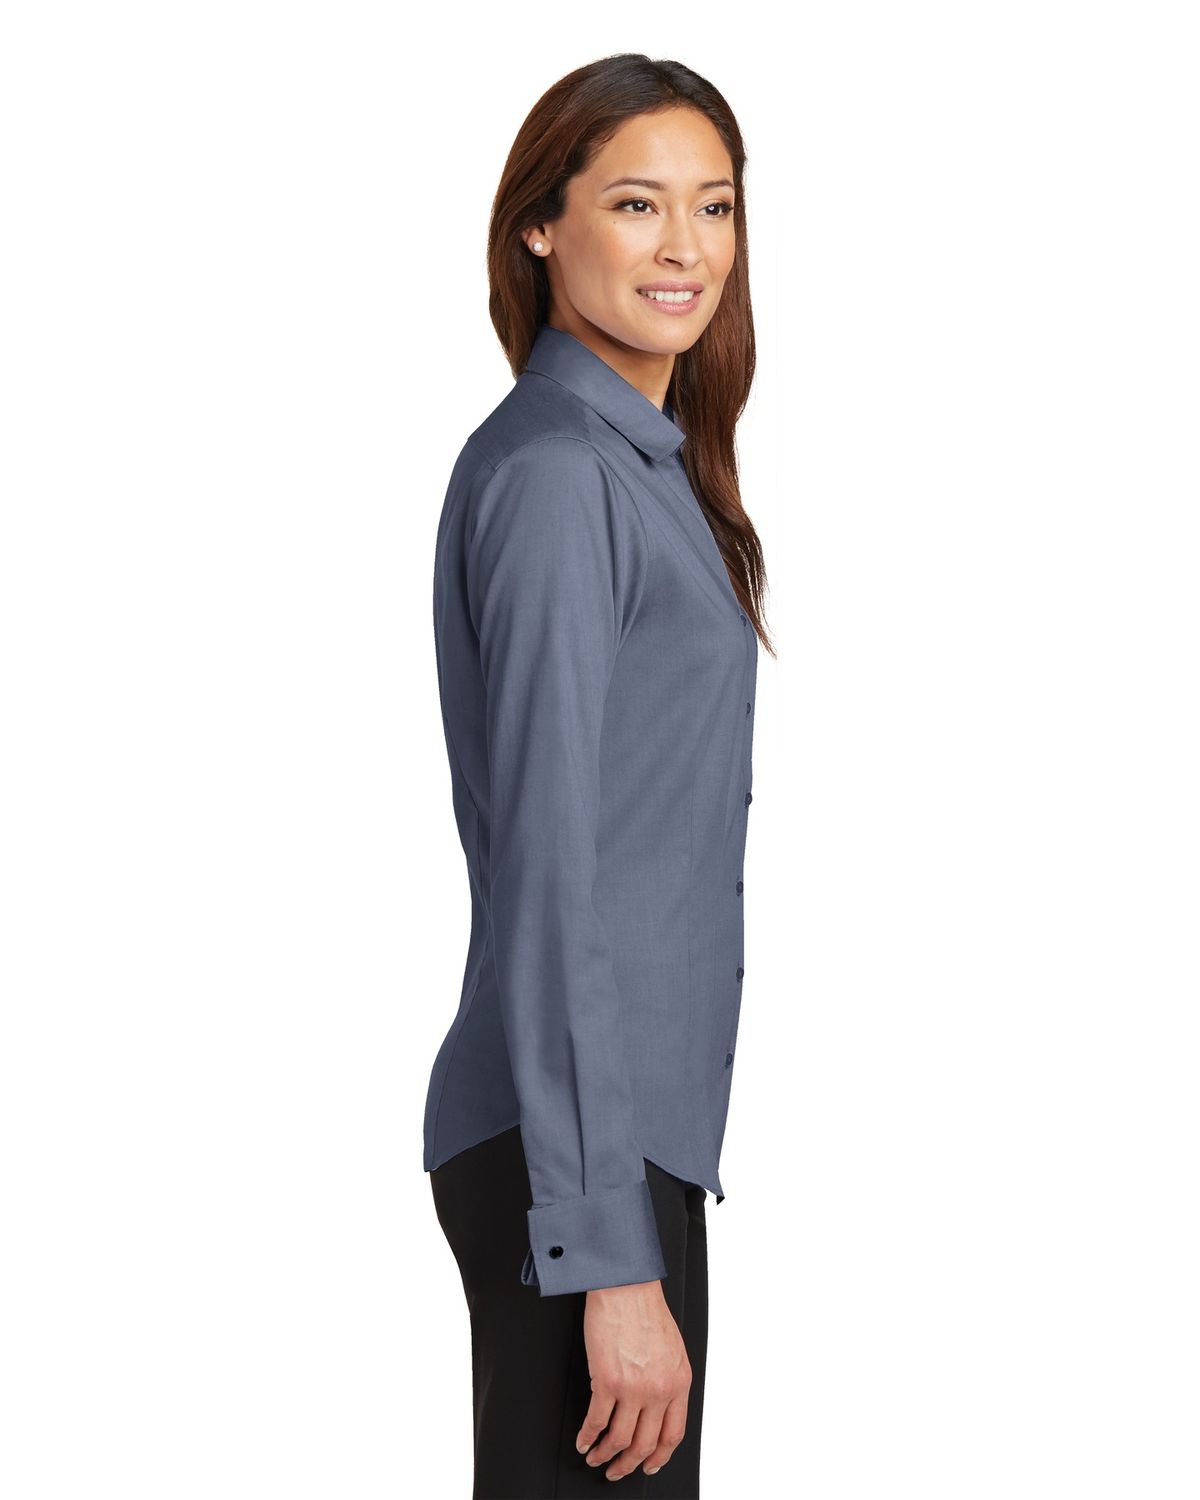 'Red House RH63 Ladies French Cuff Non Iron Pinpoint Oxford Dusk Shirt'